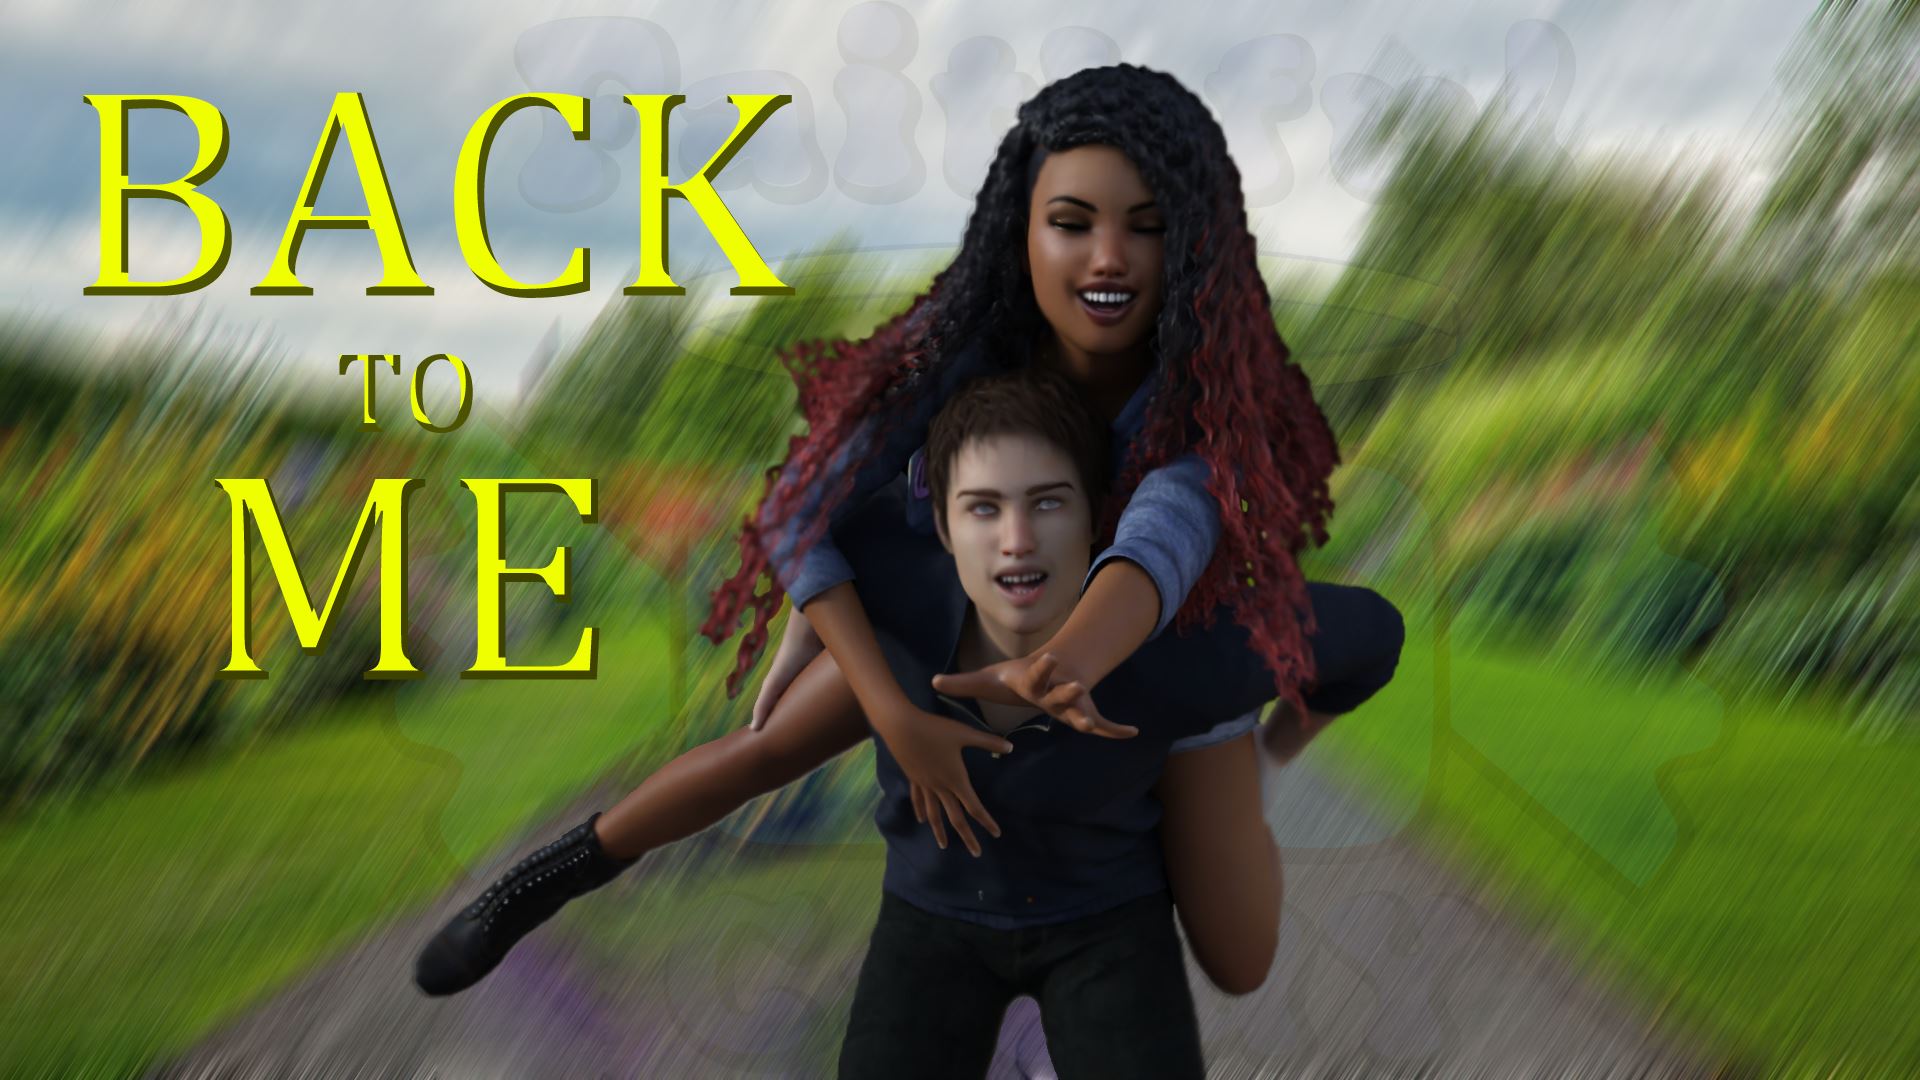 BACK to ME [Ongoing] - Version: Act 1 Part A